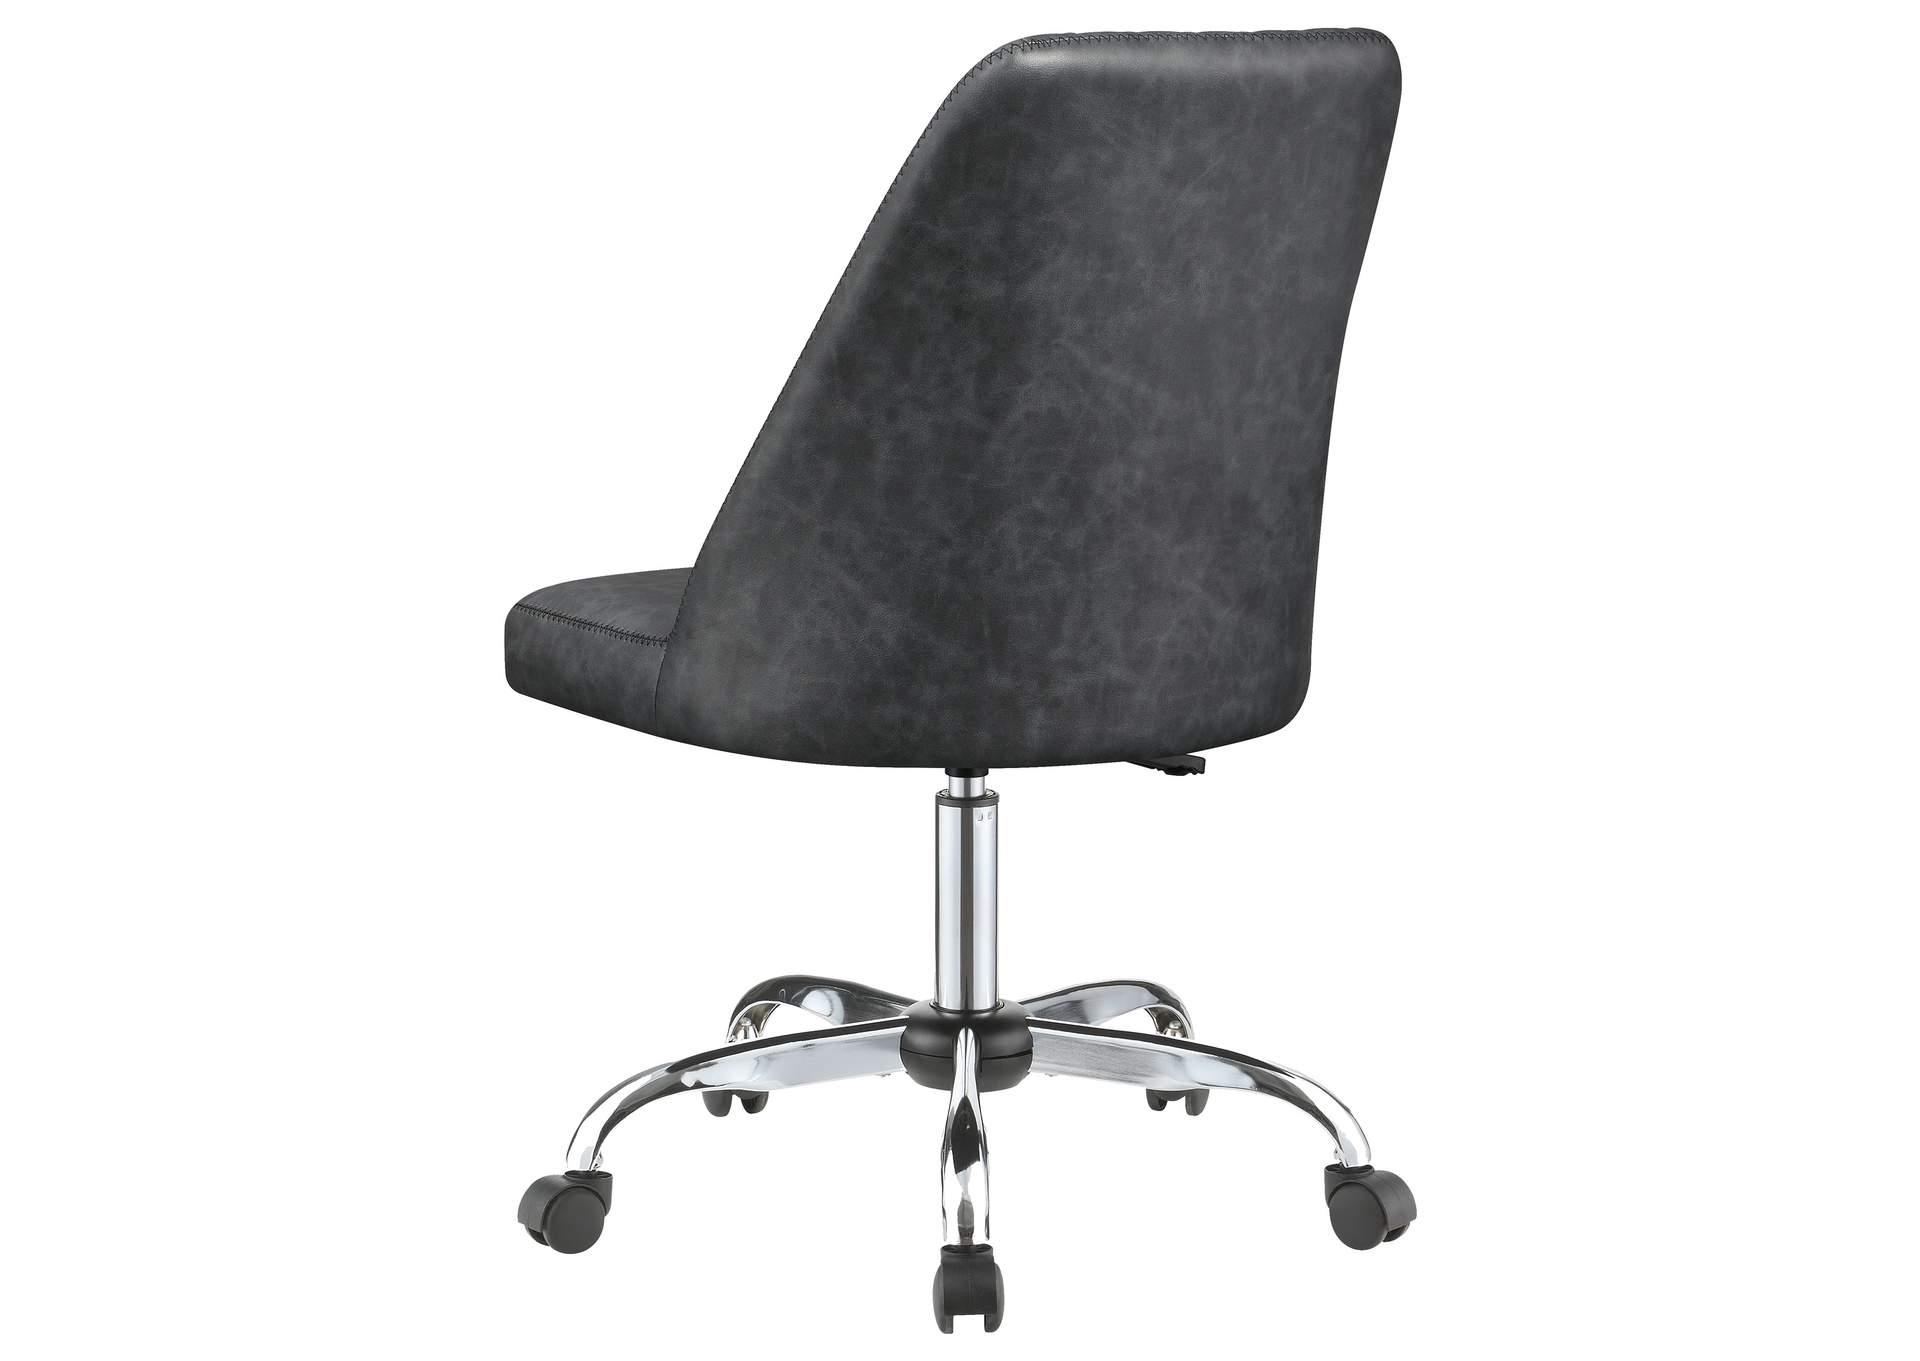 Althea Upholstered Tufted Back Office Chair Grey and Chrome,Coaster Furniture